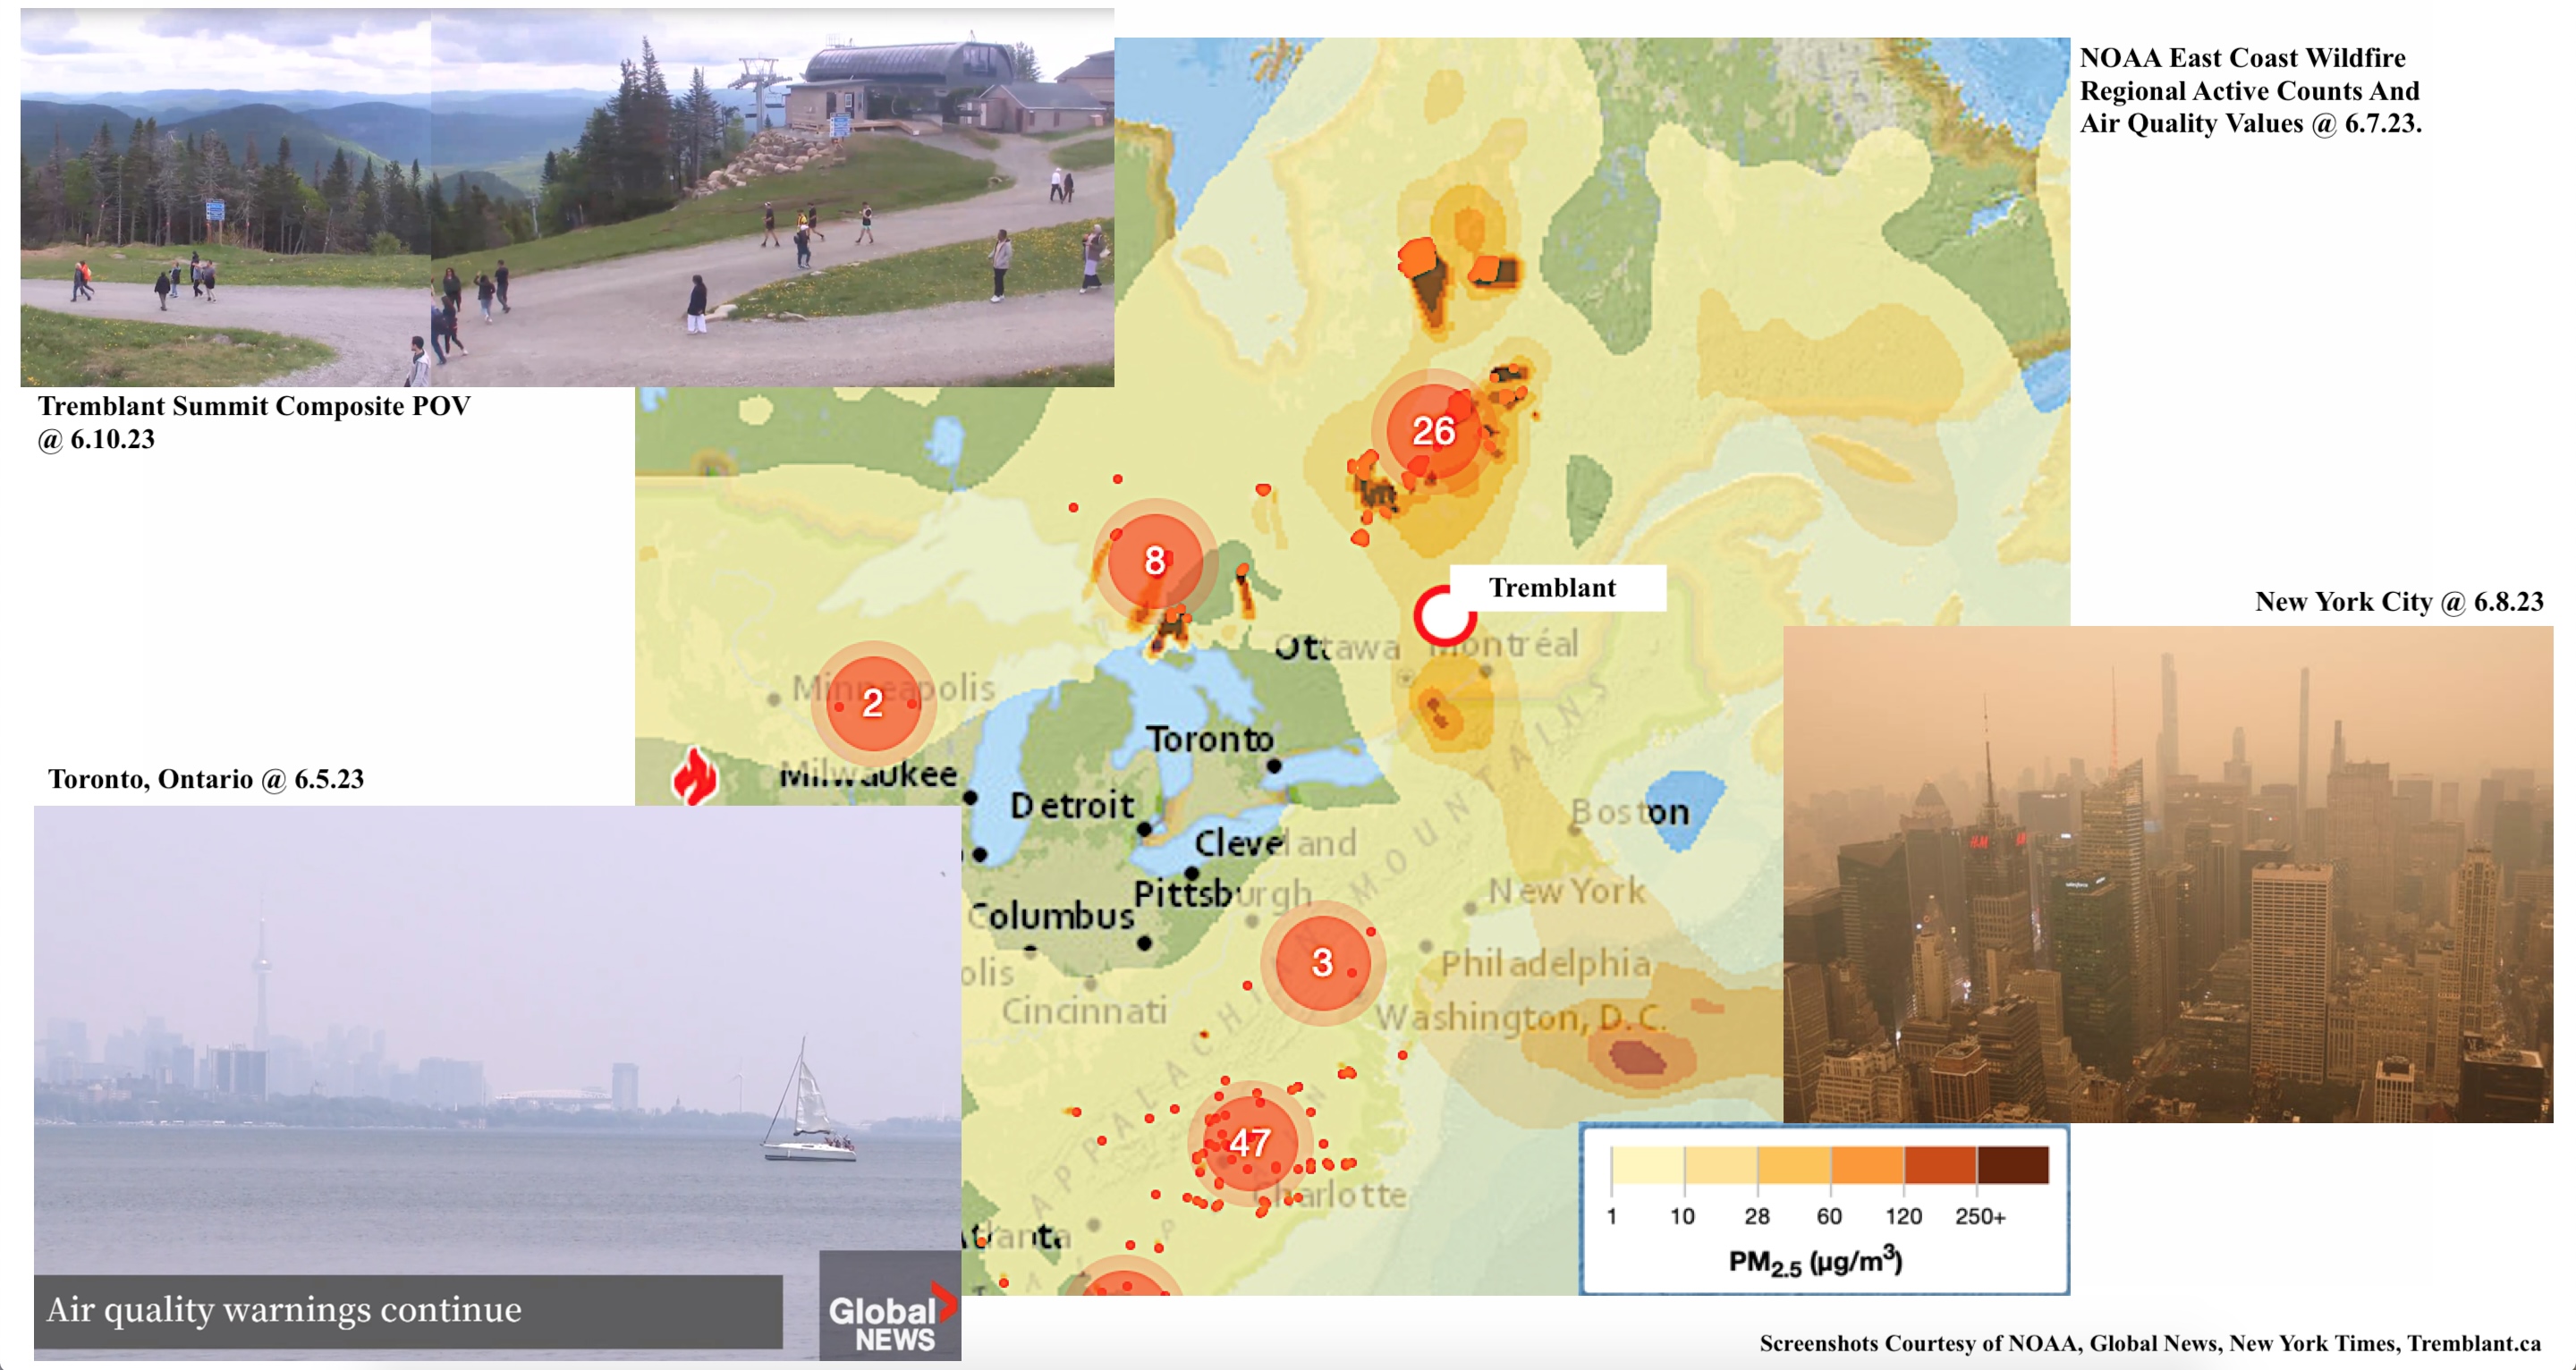 6.10.23.North.American.East.Coast.Wildfire.Smoke.Conditions.Observations.a.jpg